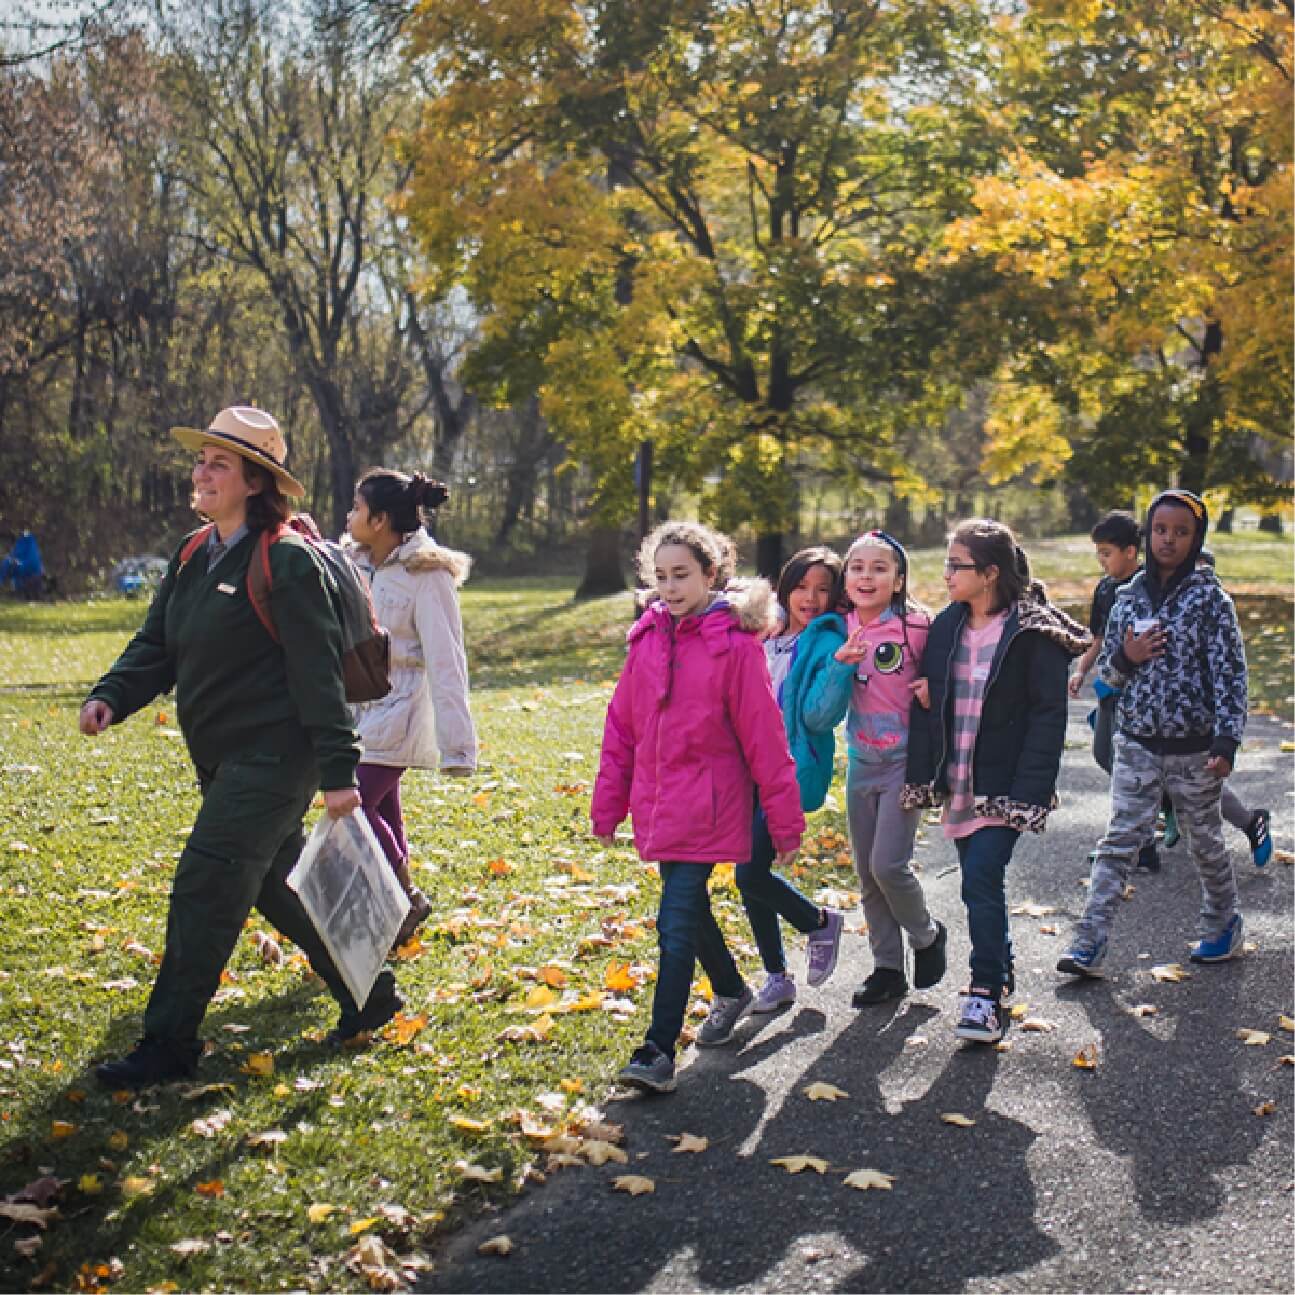 Our Featured Partners.  Click here to learn more about the Mississippi Park connection organization that connects youth to environmental learning opportunities in the Mississippi river area. The picture shown is an adult walking kids outside in nature.